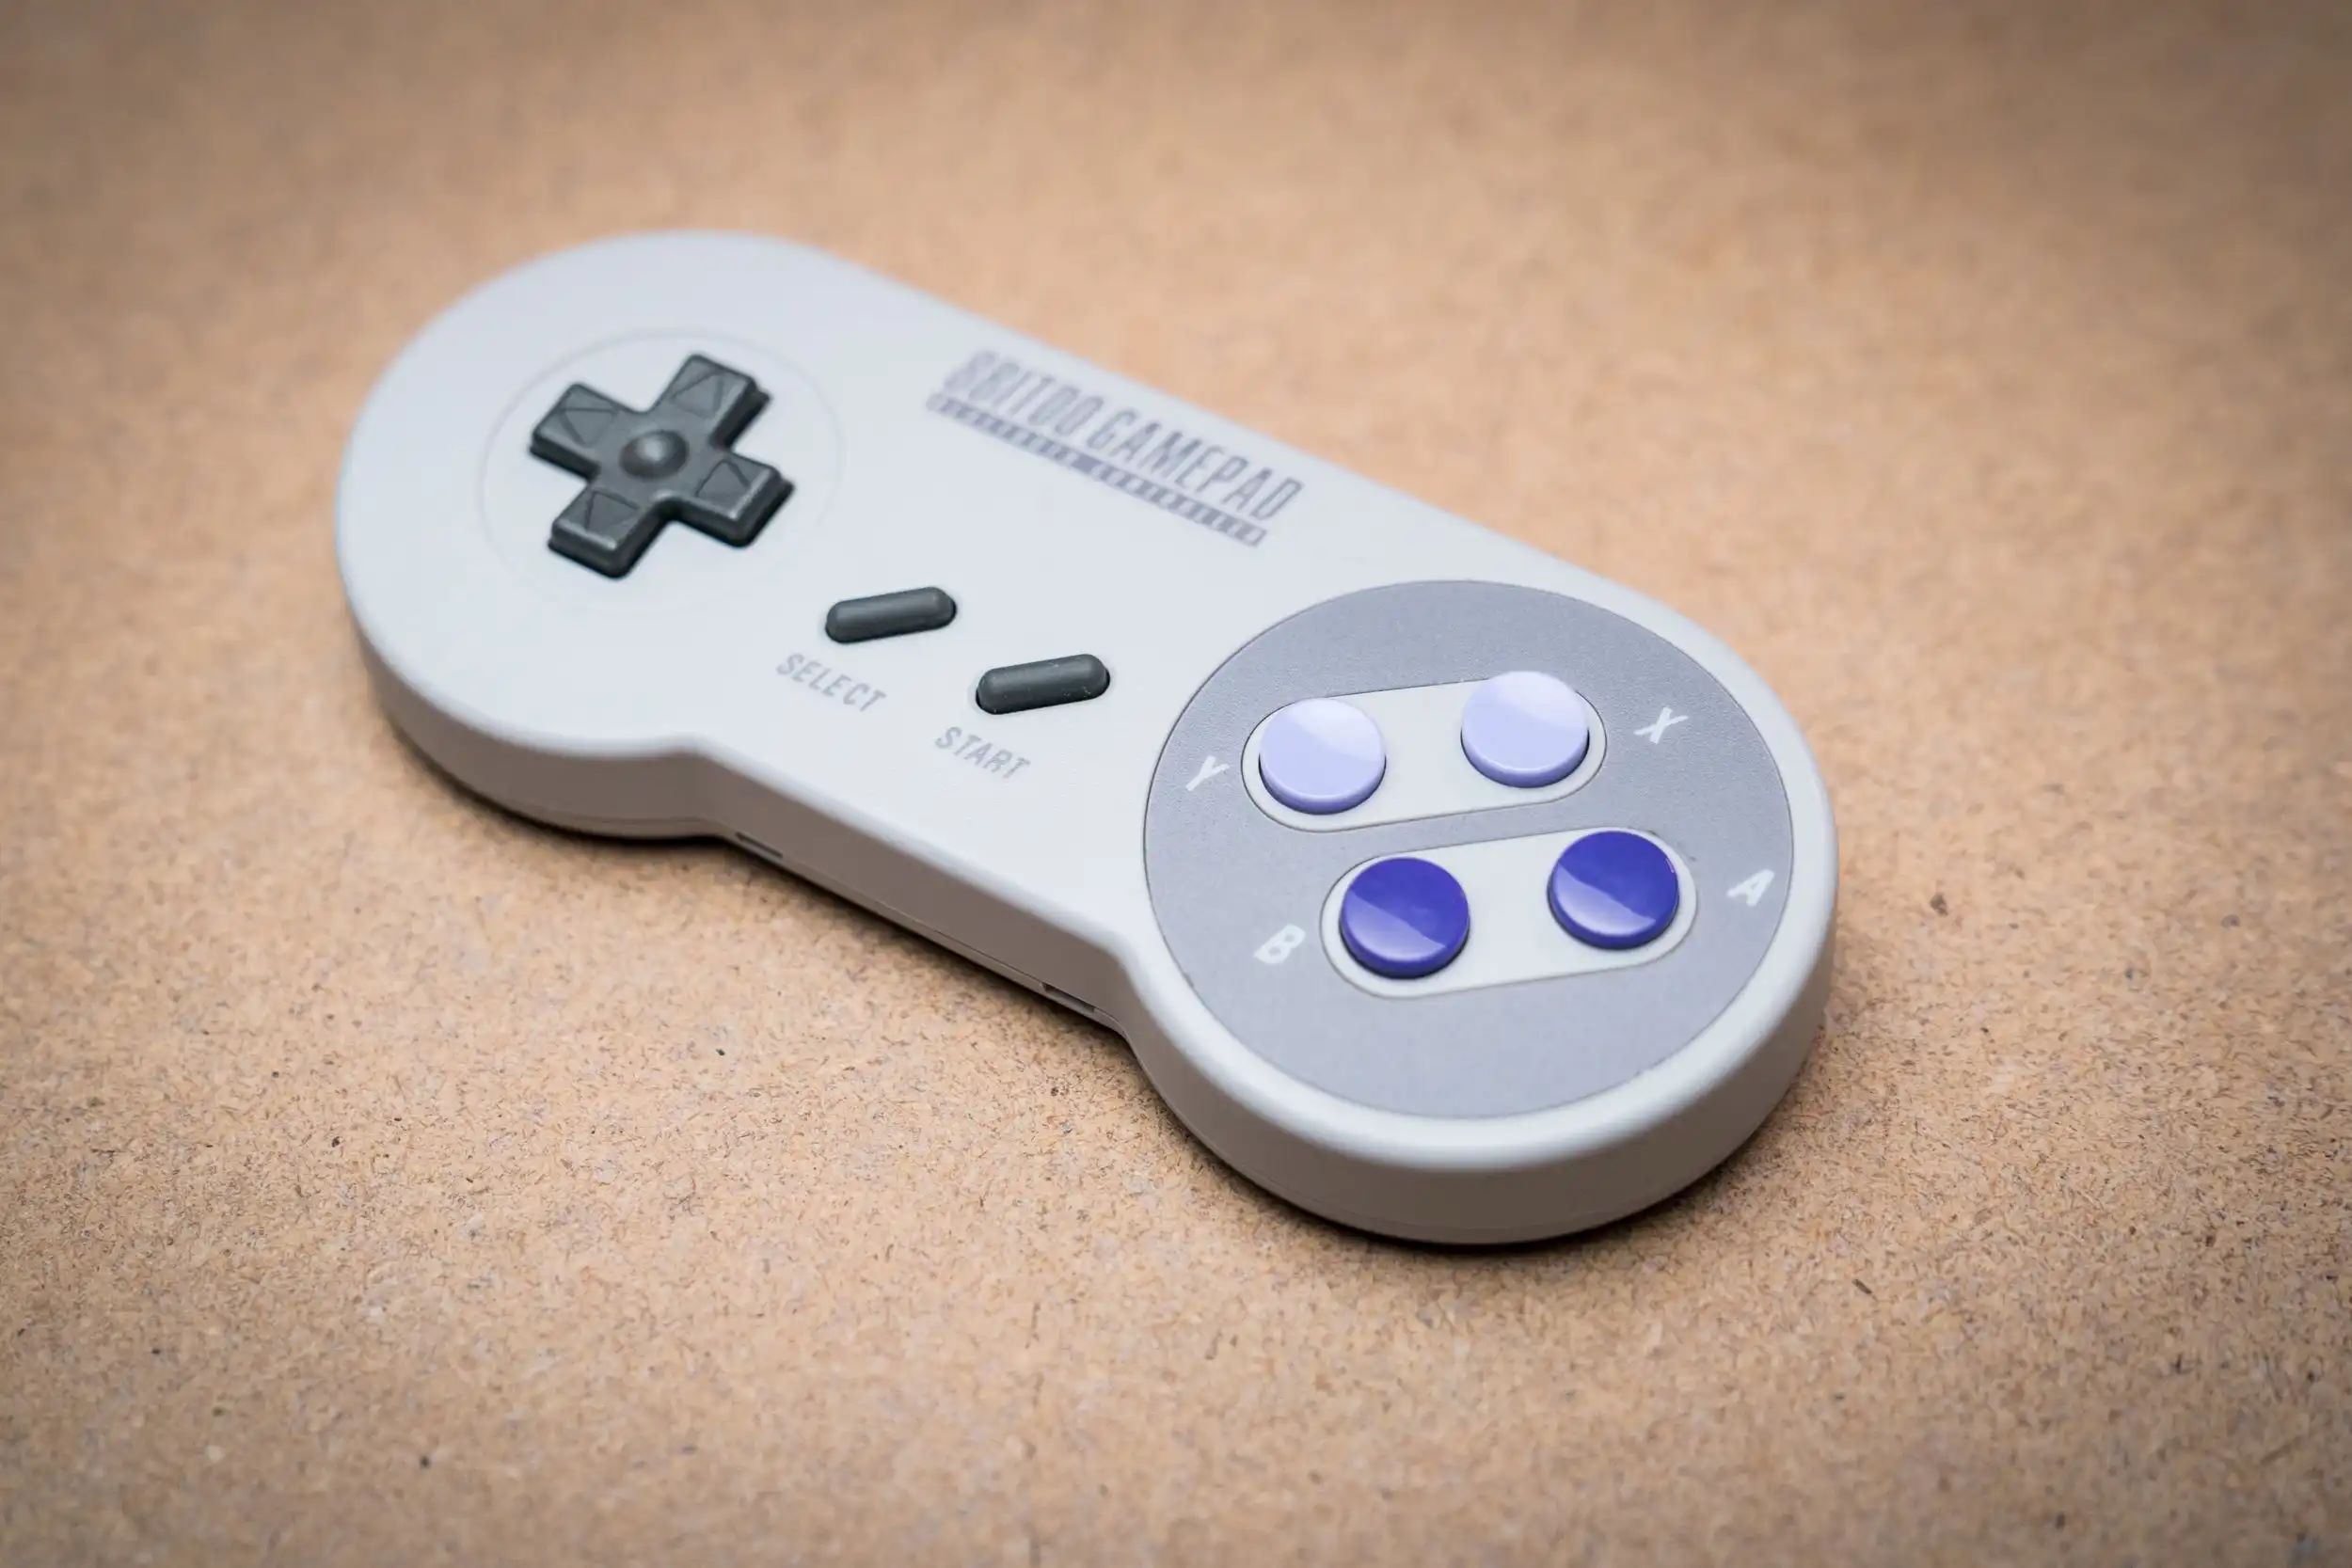 How To Turn Off The Snes30 Game Controller